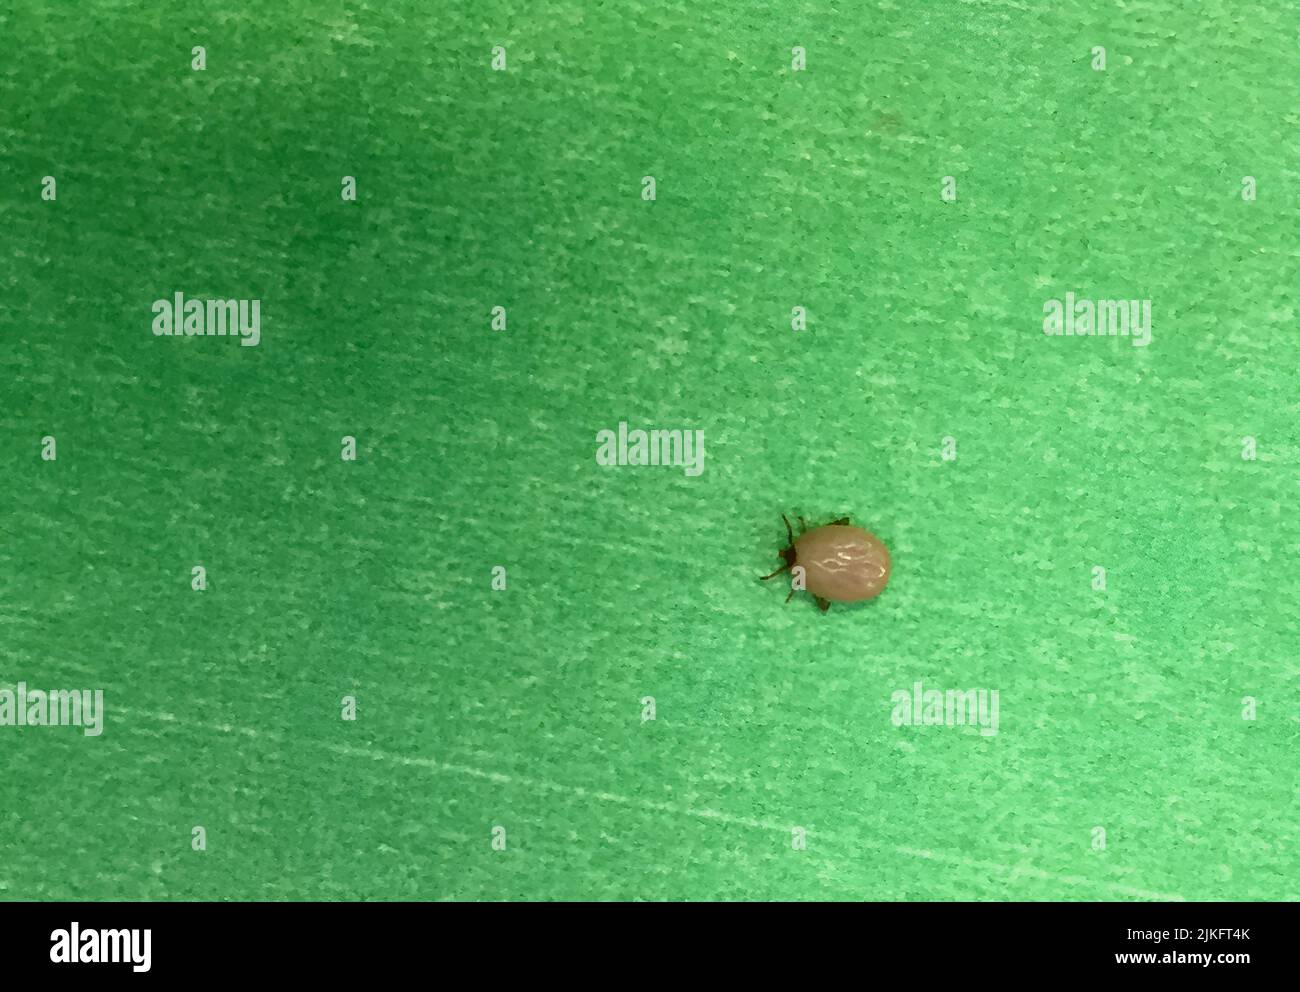 https://c8.alamy.com/comp/2JKFT4K/this-engorged-tick-collected-in-annapolis-maryland-is-likely-an-adult-female-deer-tick-or-and-lti-and-gtixodes-scapularis-and-lti-and-gt-deer-ticks-are-also-called-blacklegged-ticks-and-can-transmit-pathogens-that-cause-tick-borne-diseases-such-as-babesiosis-and-lyme-disease-credit-niaid-2JKFT4K.jpg